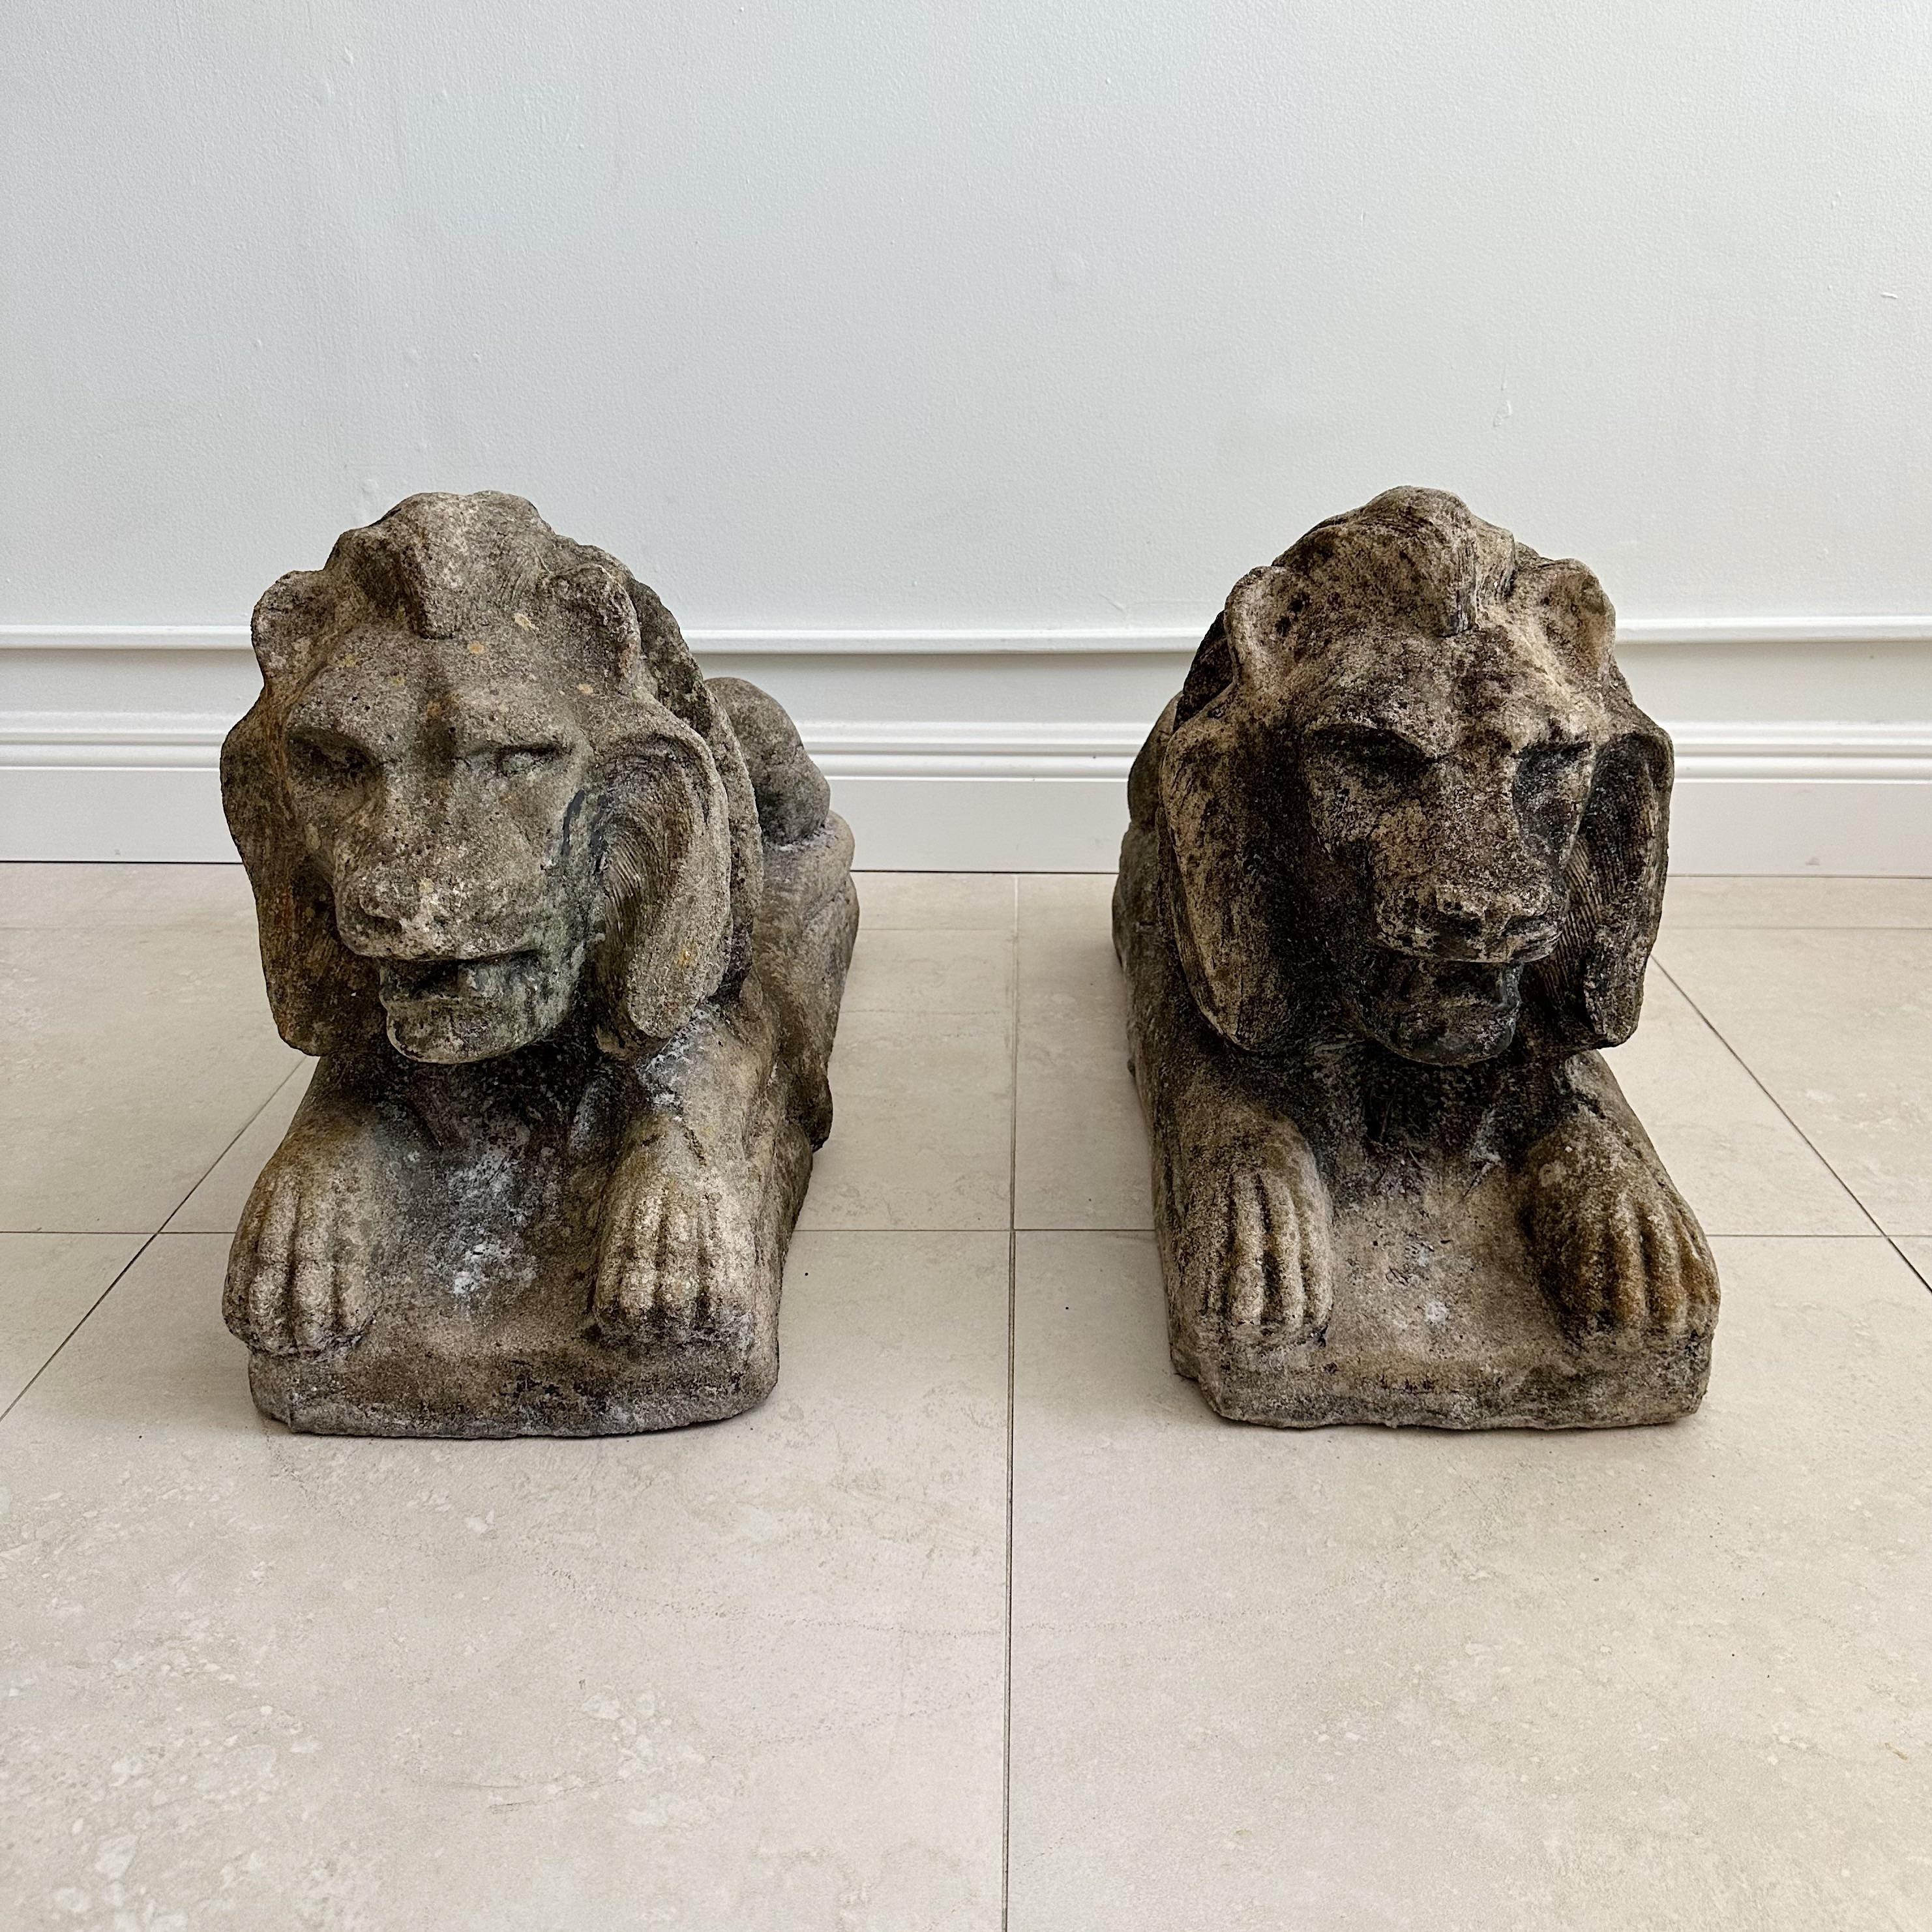 Pair of reclining cement Lions from the mid 20th century with a lovely weathered patina, in excellent vintage condition.